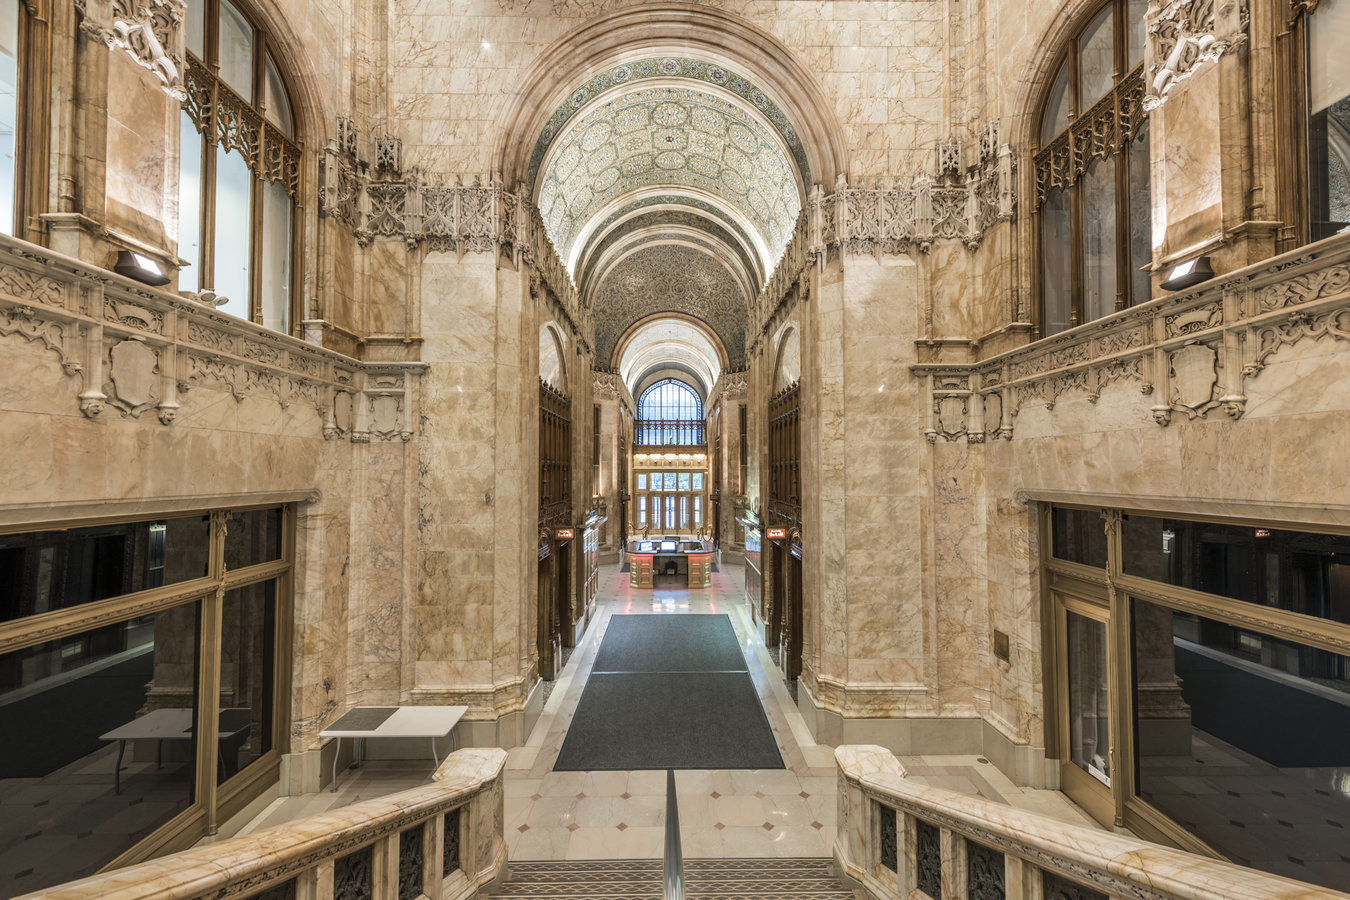 woolworth building guided tour